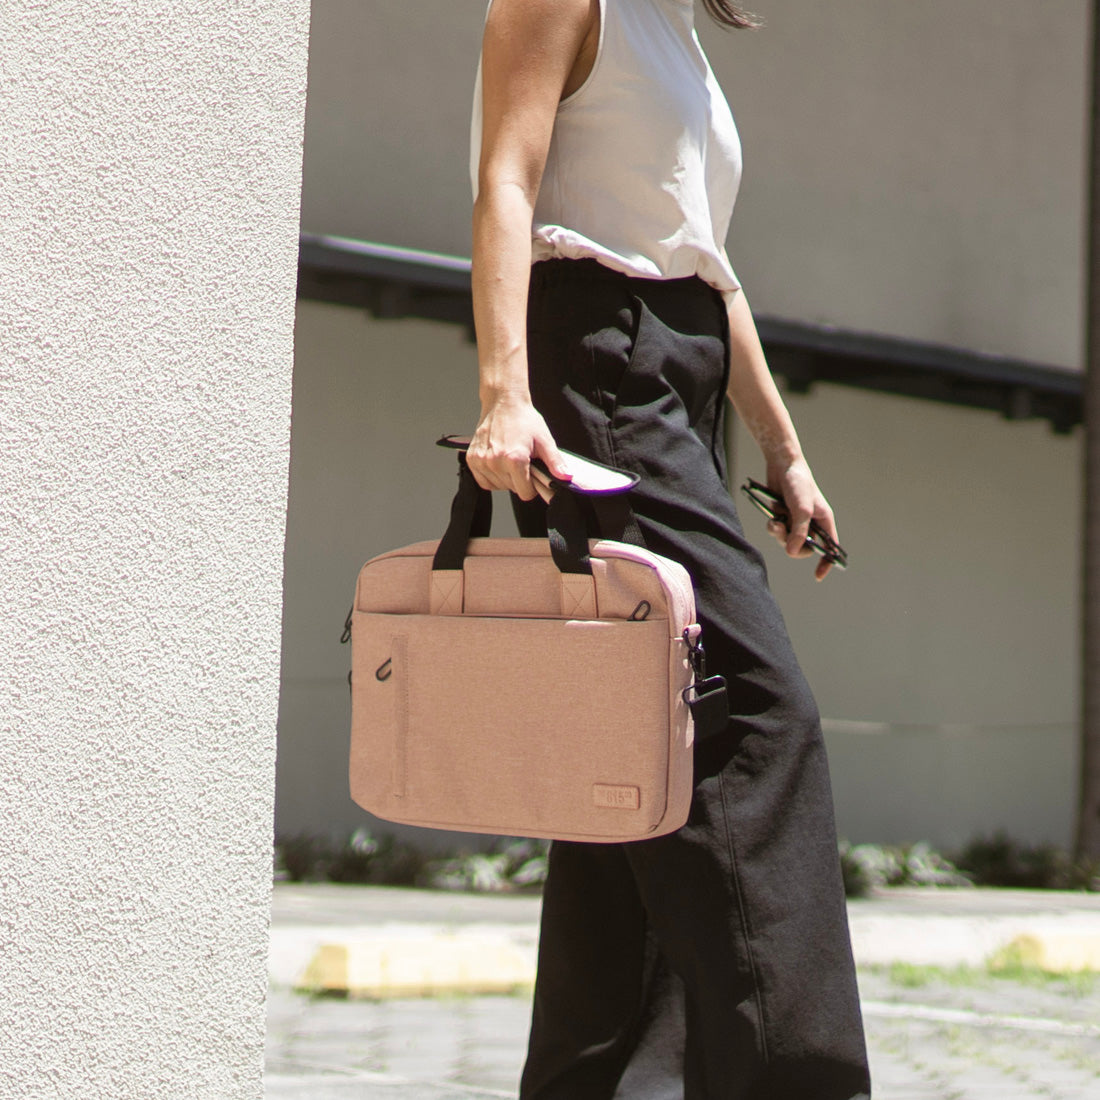 The Serena Laptop Bag in Pink ( 2 sizes: 14" & 18" )